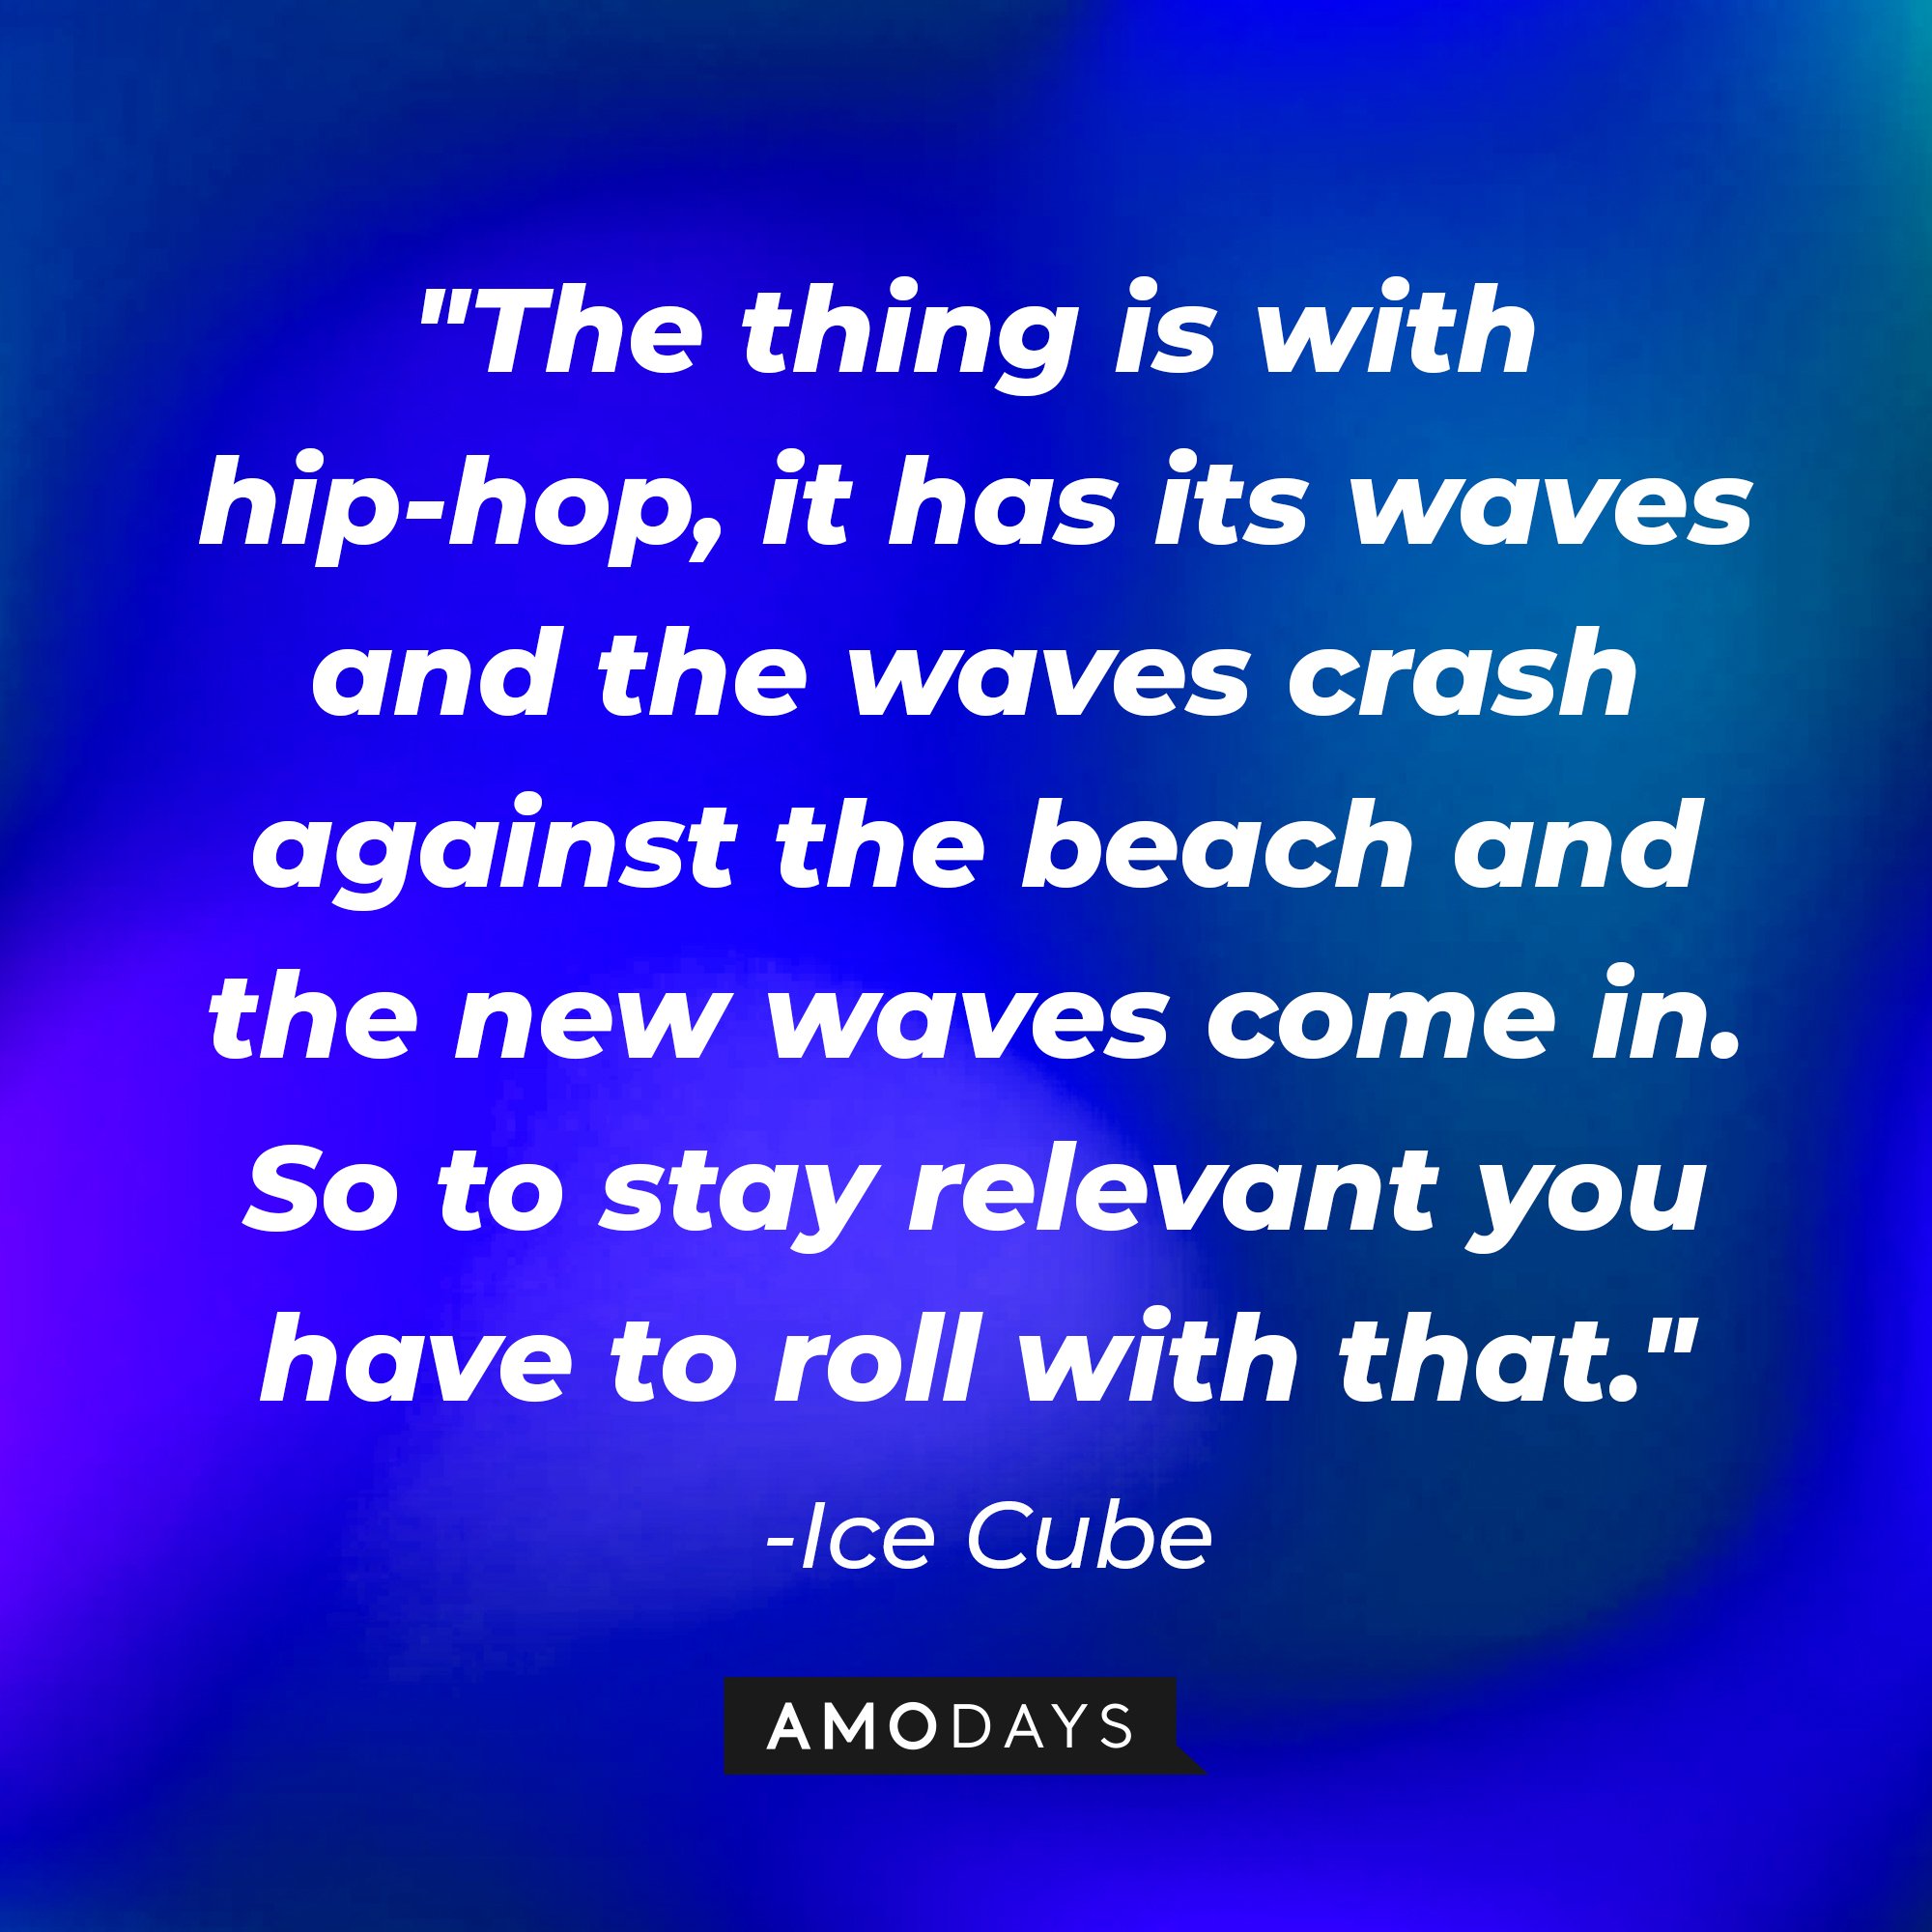 Ice Cube's quote: "The thing is with hip-hop, it has its waves and the waves crash against the beach and the new waves come in. So to stay relevant you have to roll with that." — Ice Cube | Image: AmoDays